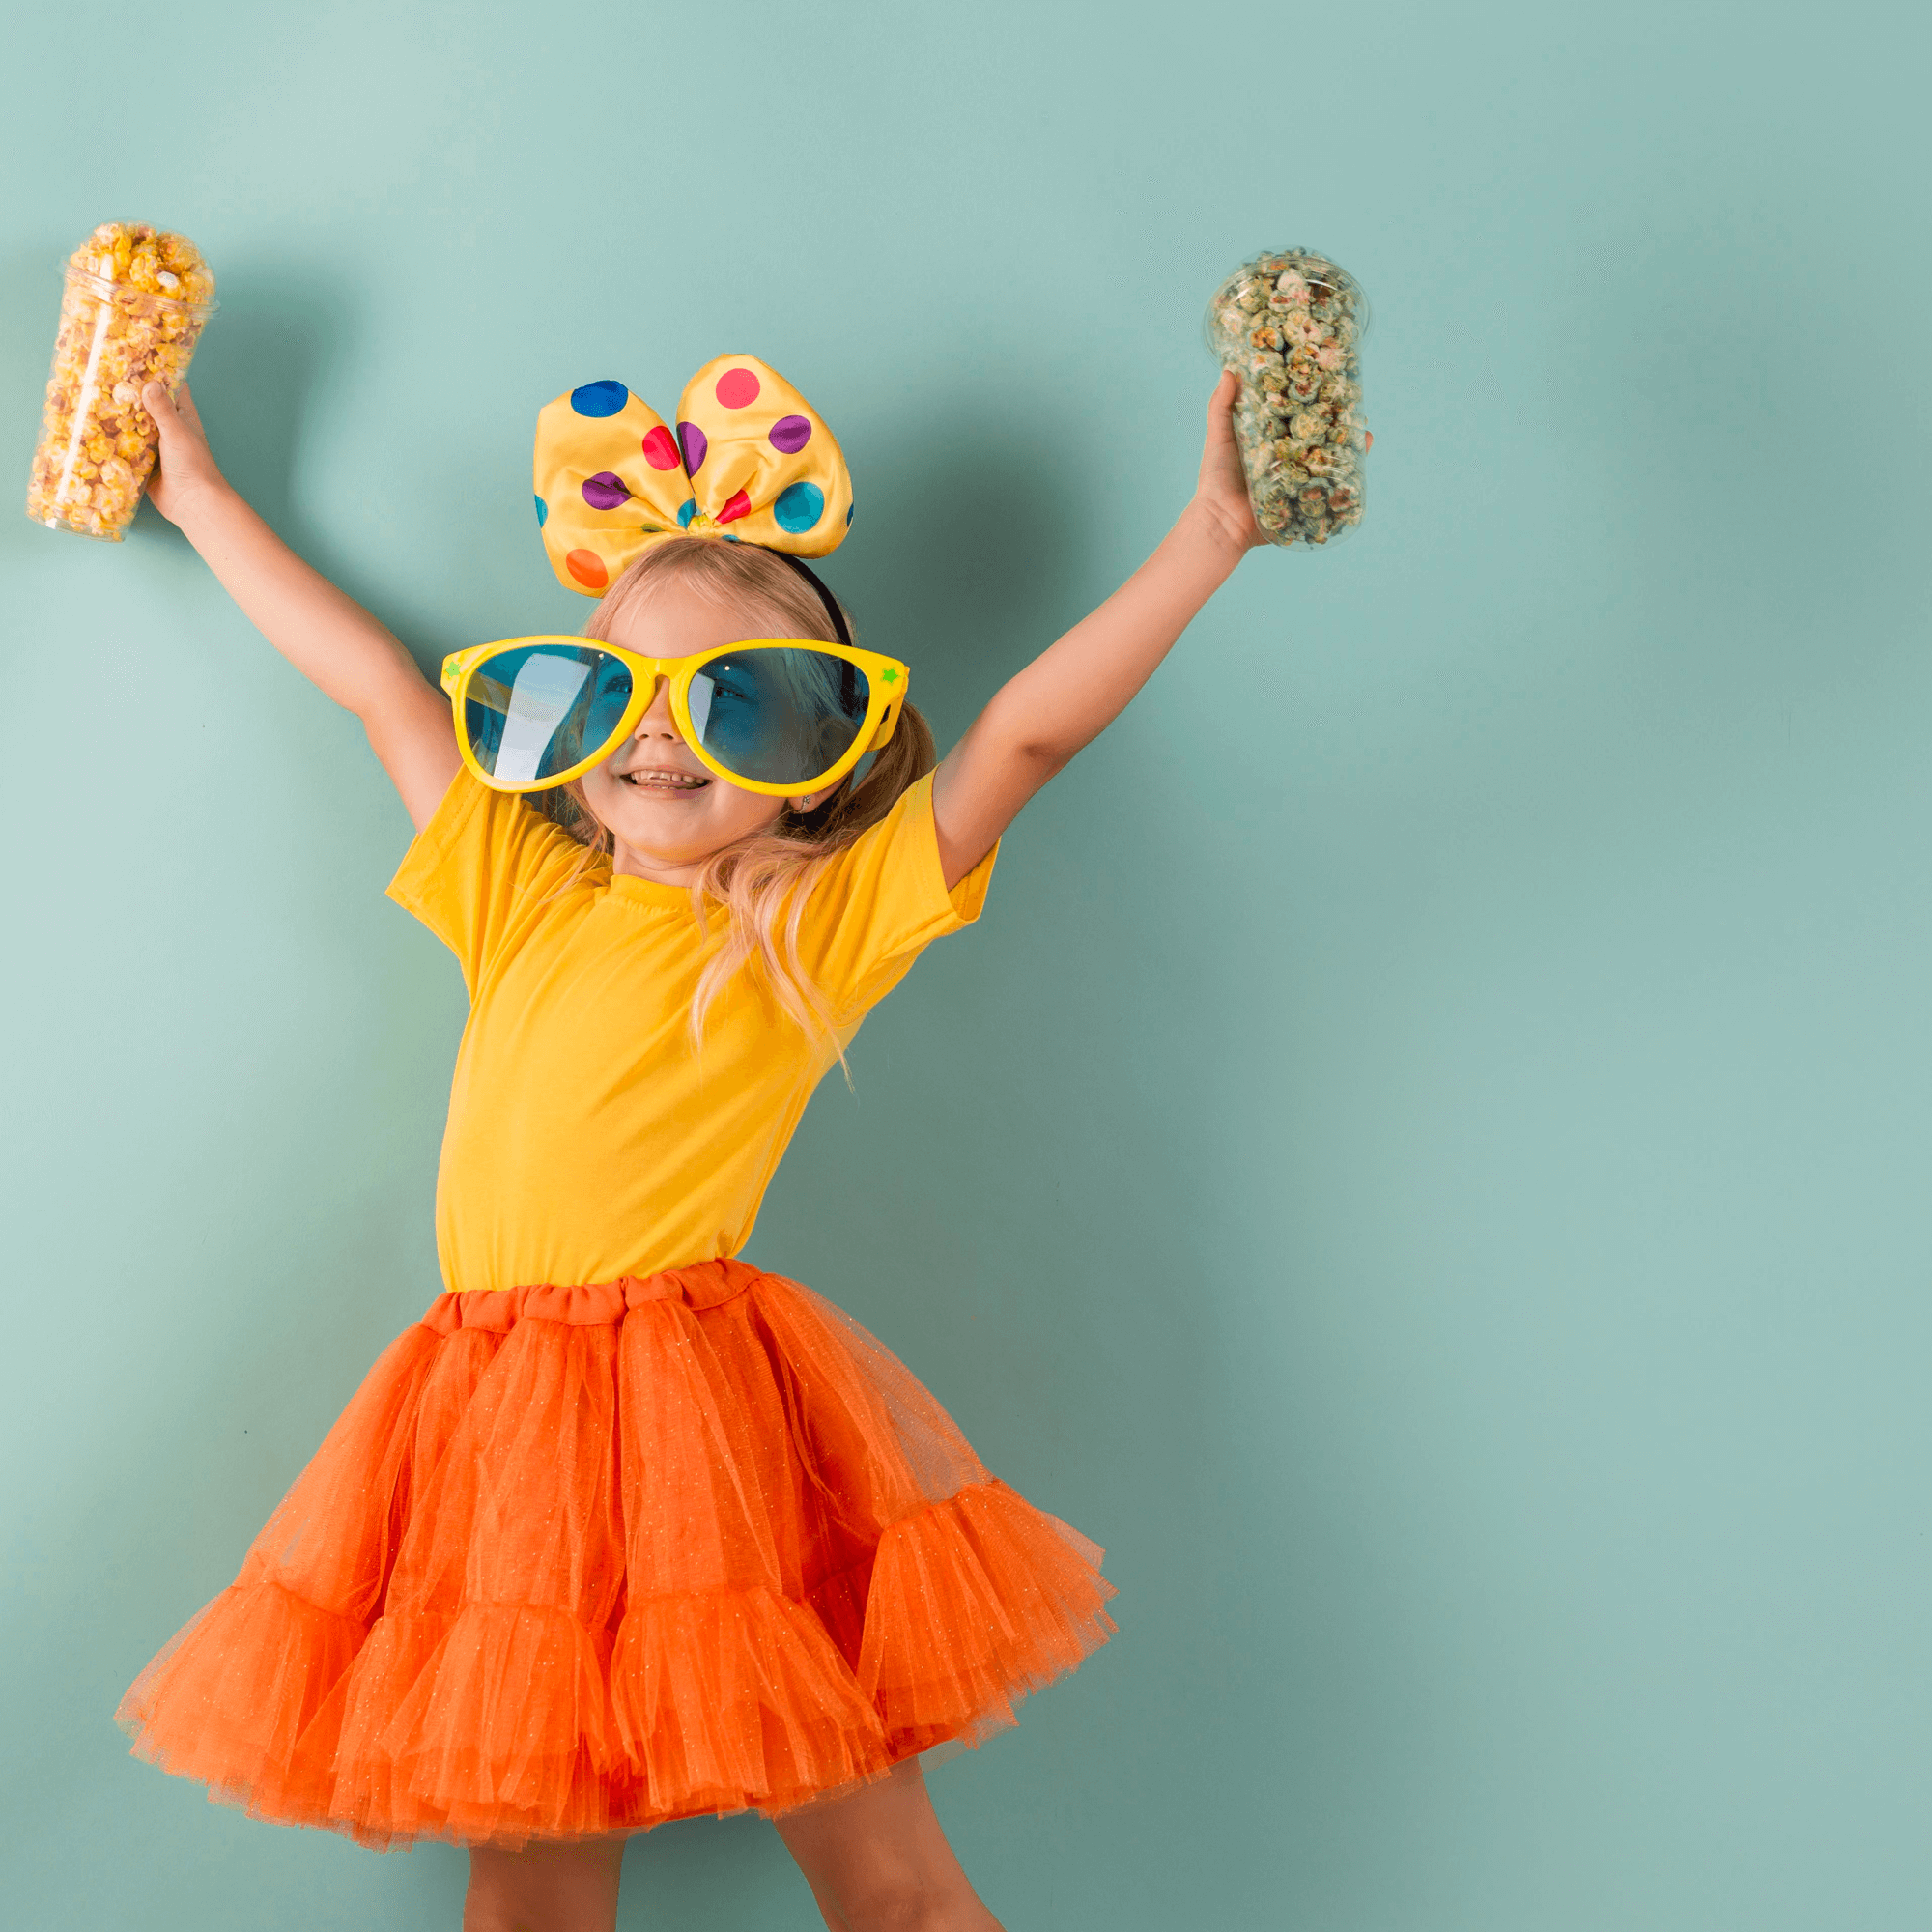 7 Incredible May Activities for Kindergarten to Use in 2023